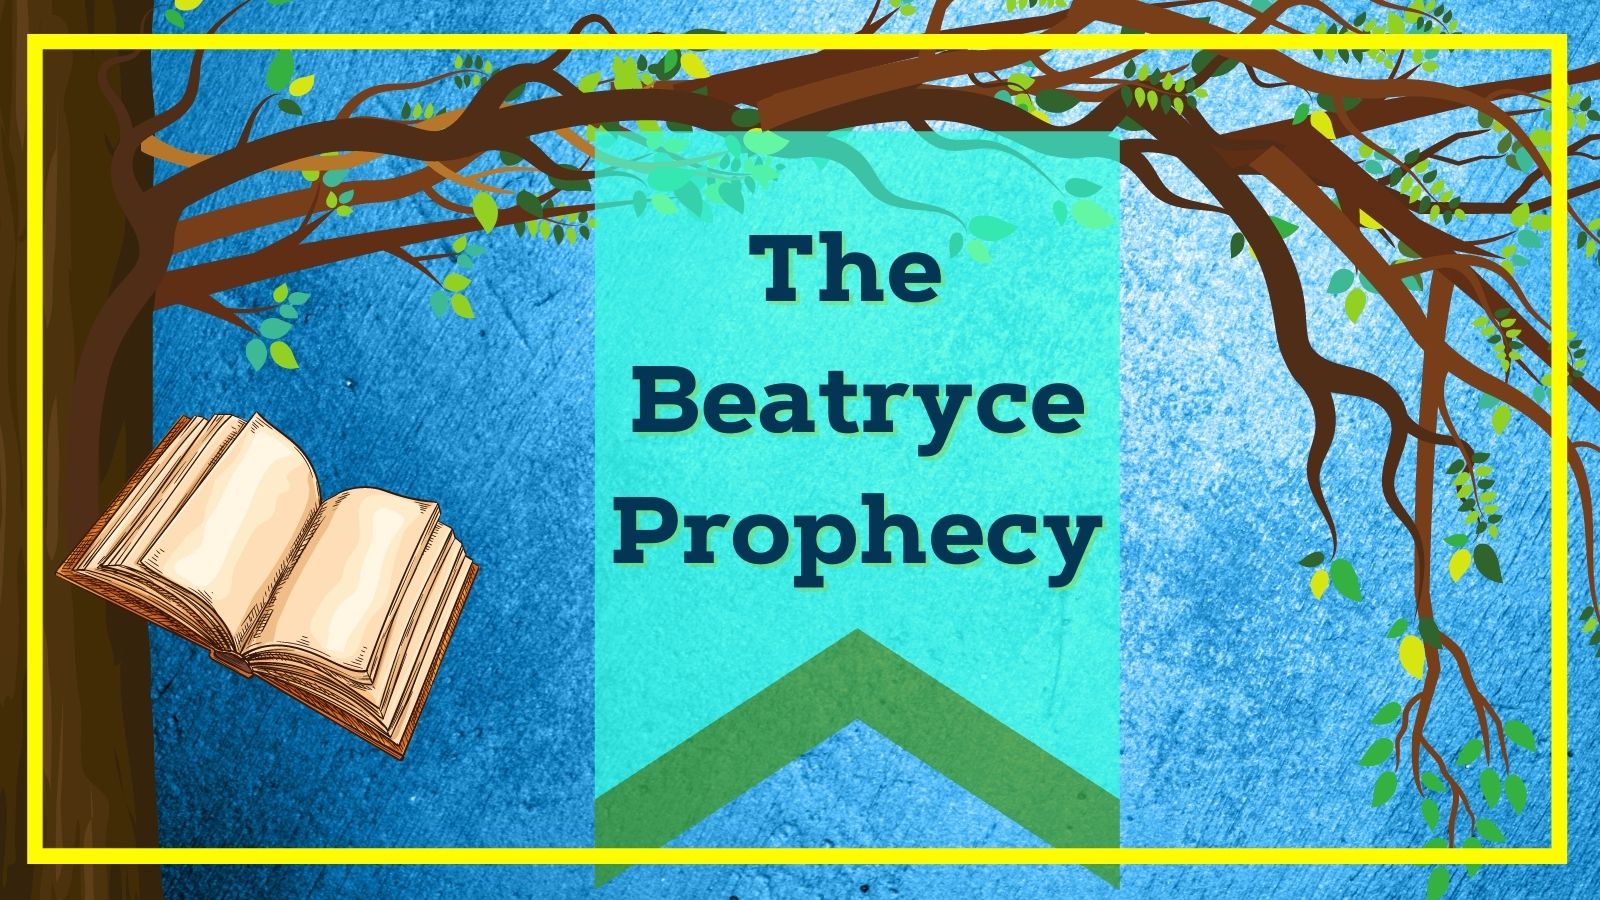 The Beatryce Prophecy discussion questions